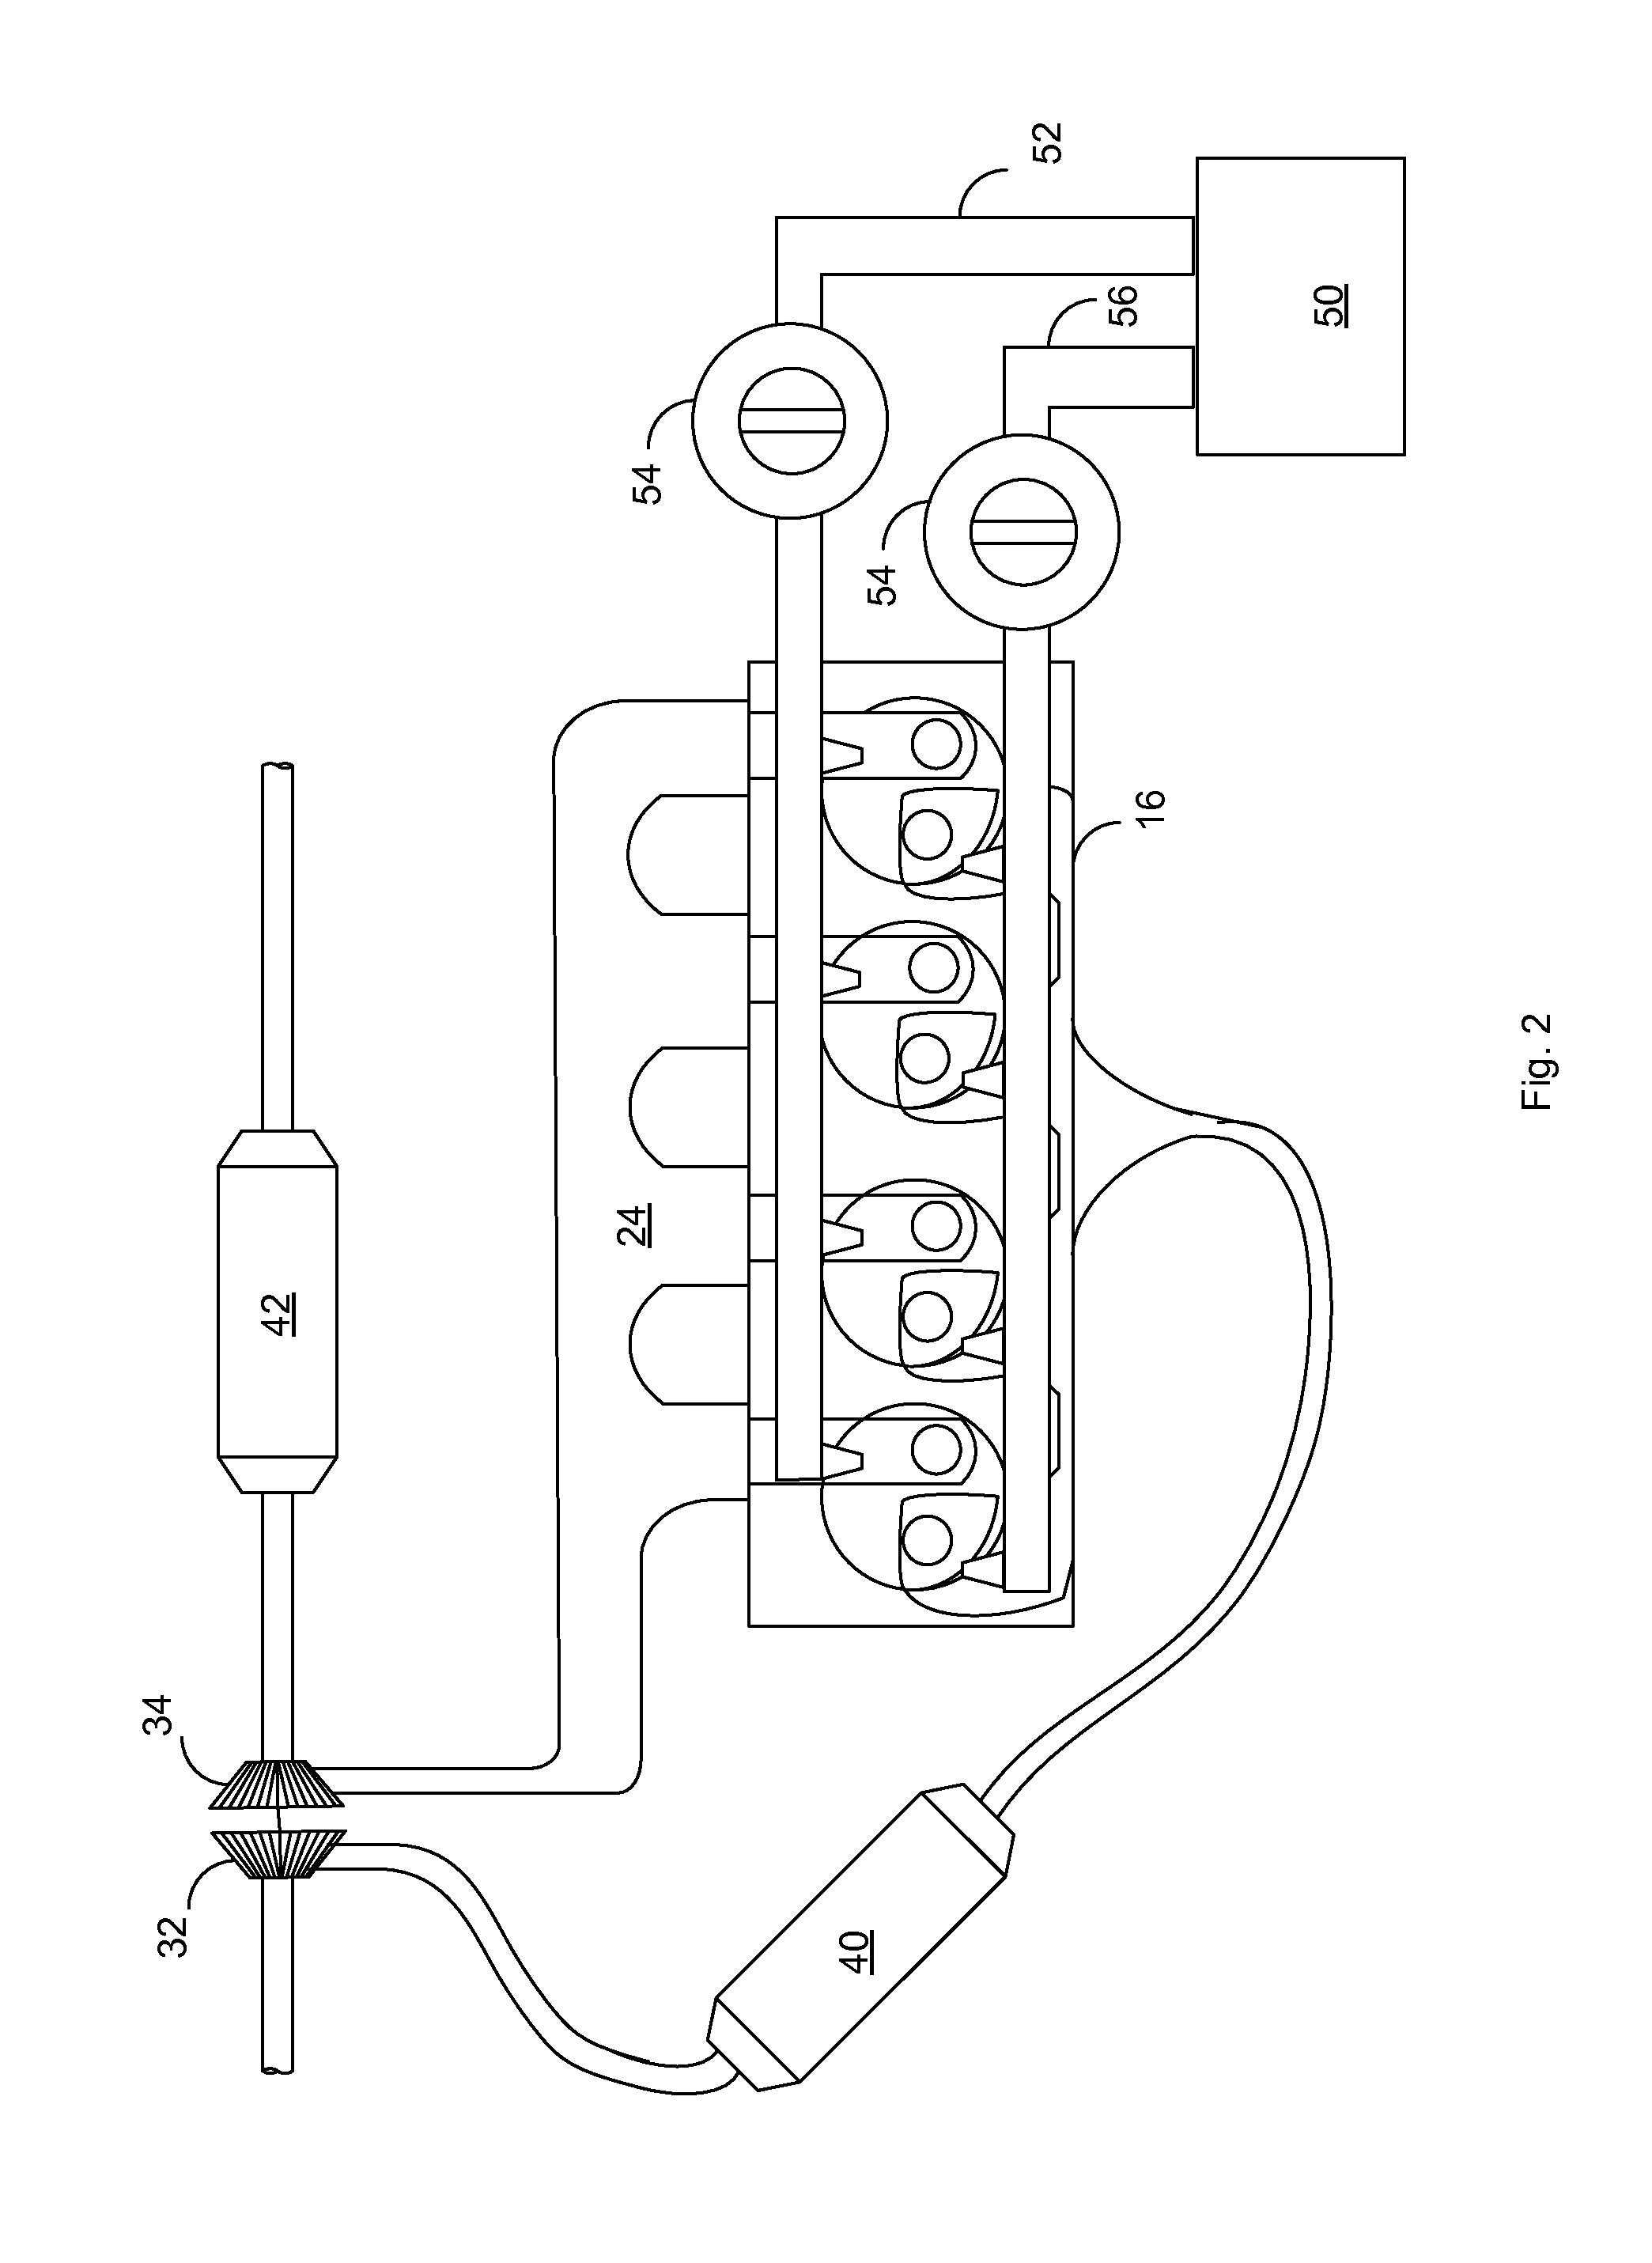 Method and apparatus for injecting hydrogen within an engine